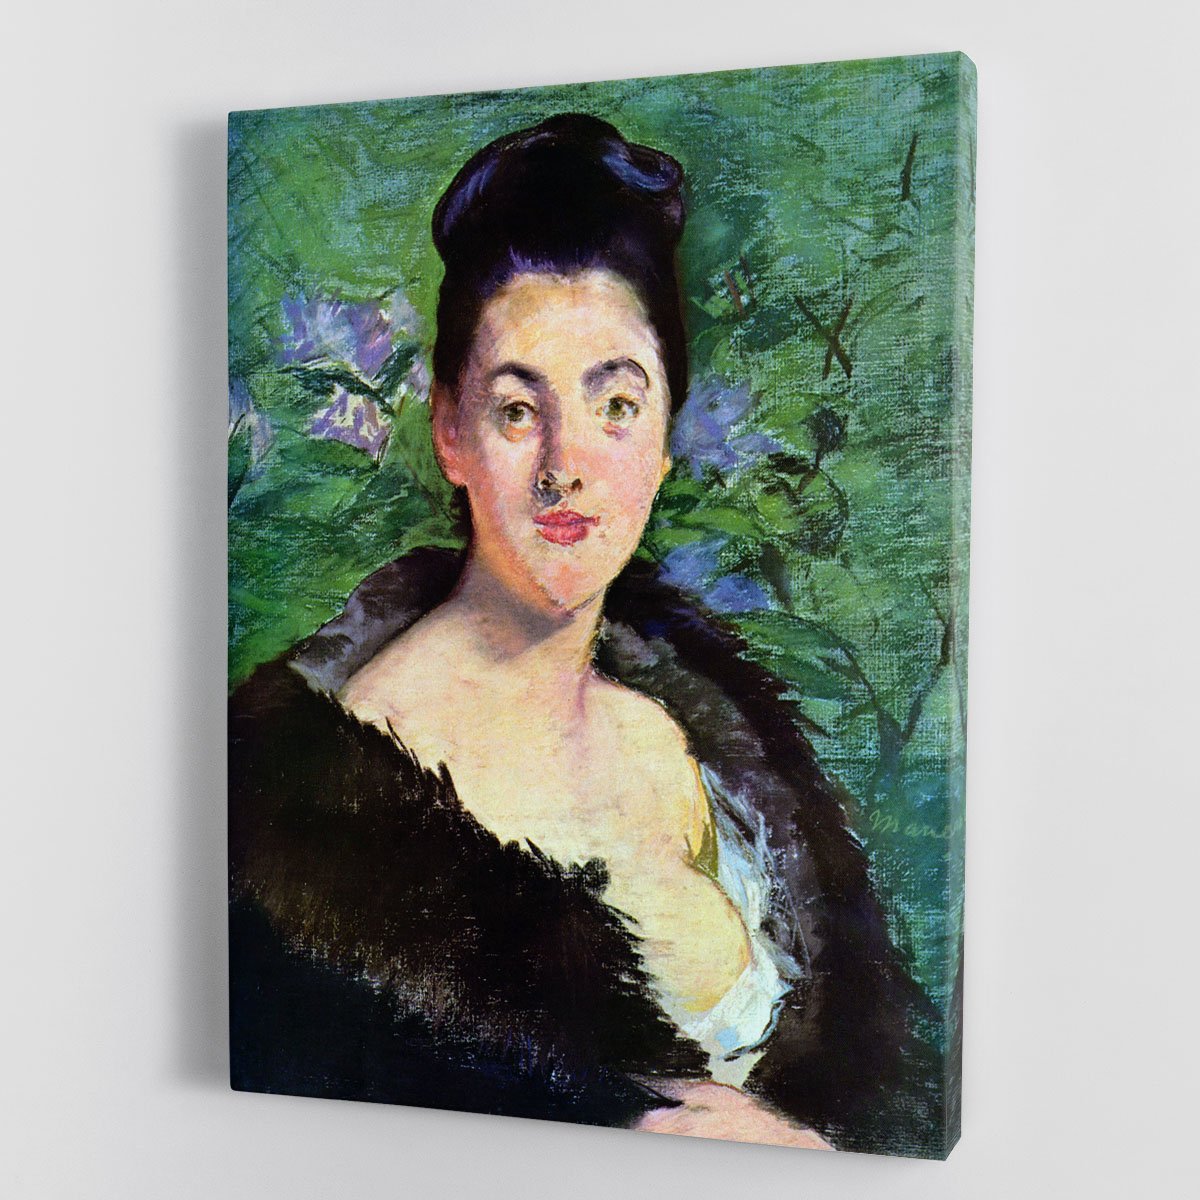 Lady in Fur by Manet Canvas Print or Poster